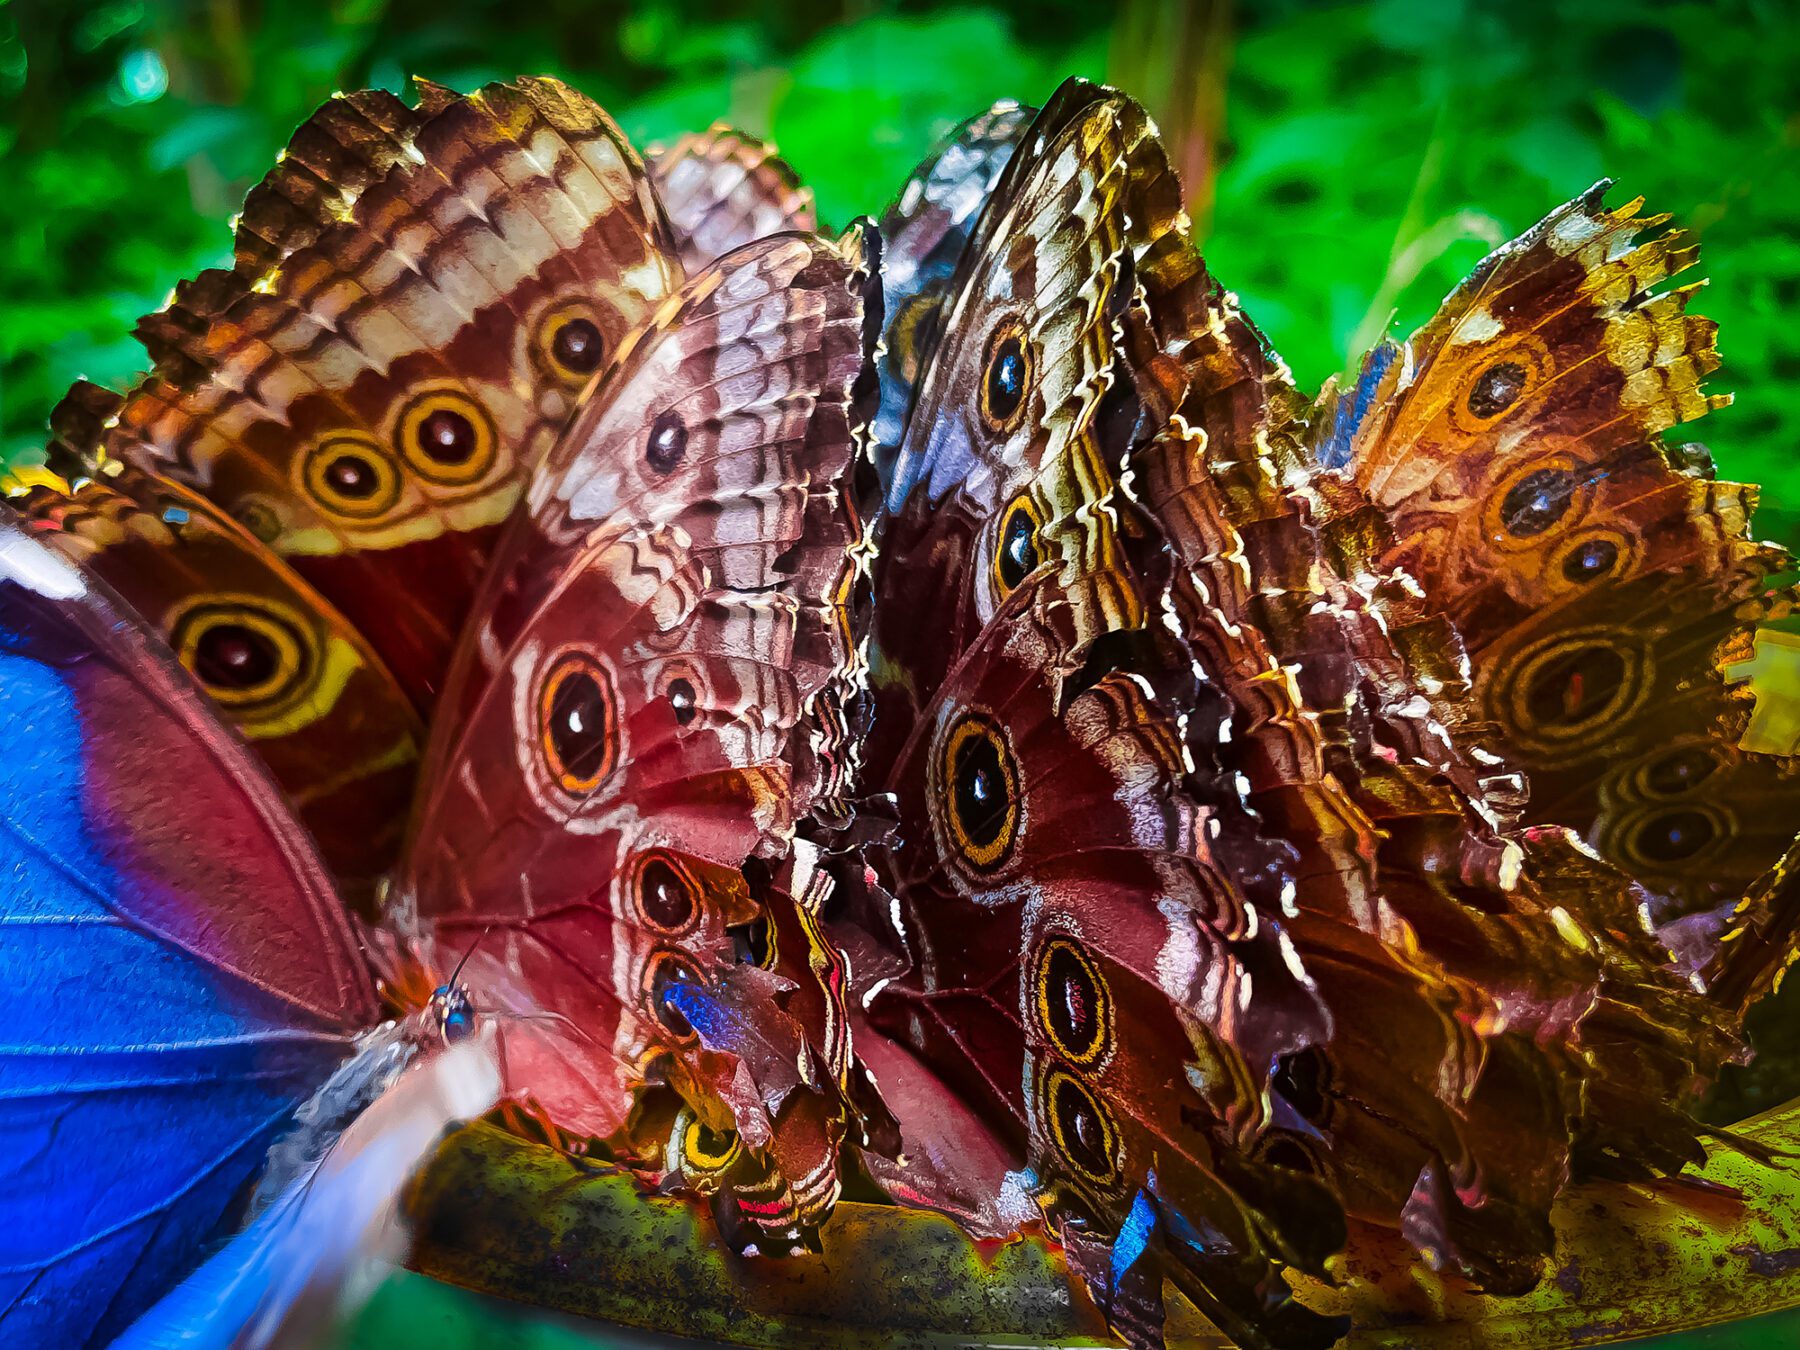 A group of Costa Rica MRM butterflies in a bowl.